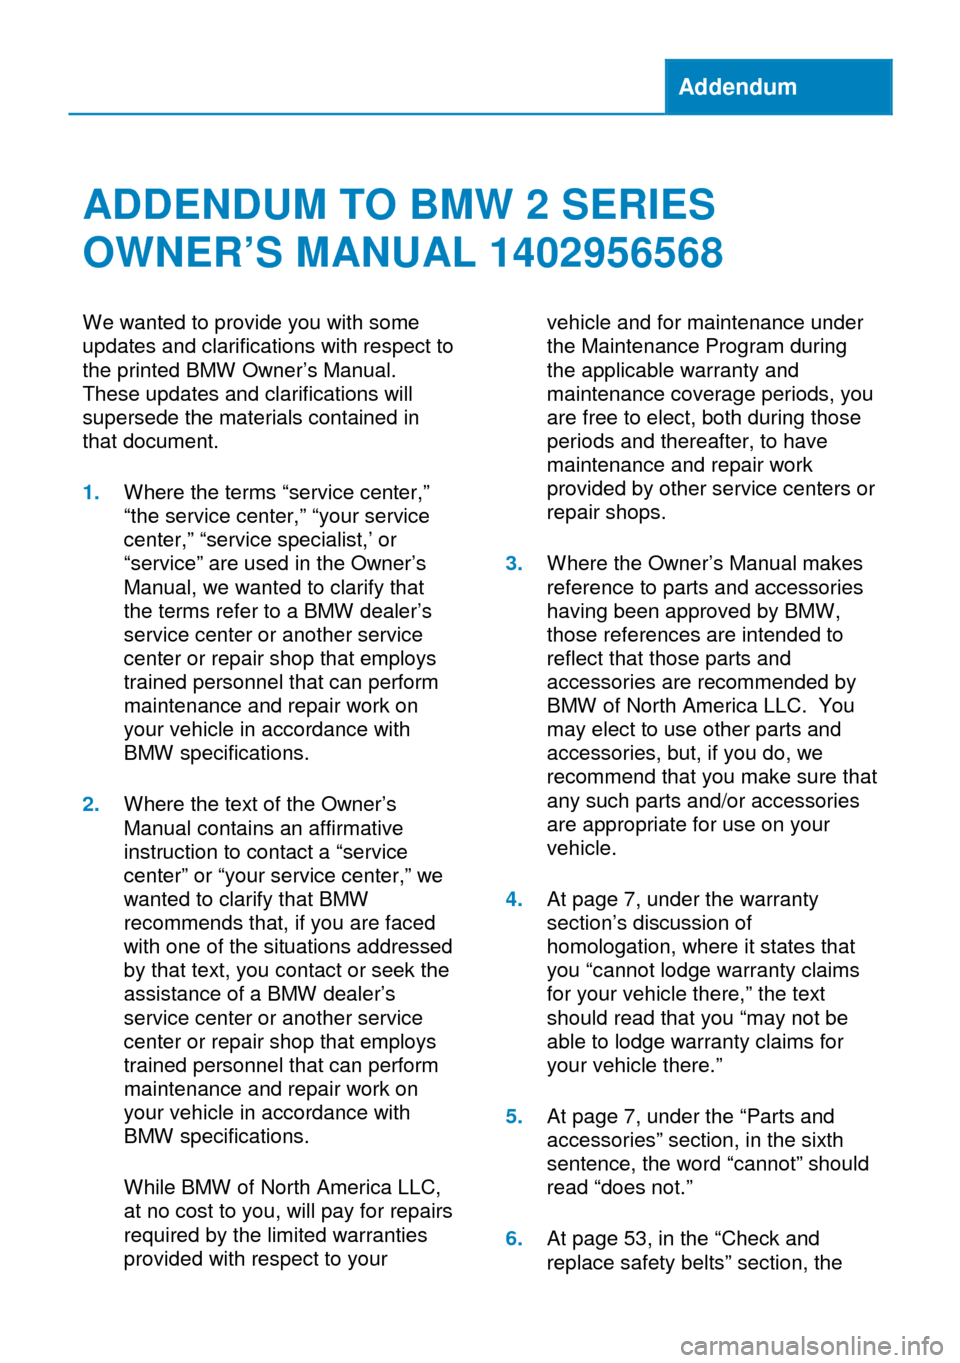 BMW 2 SERIES 2014 F22 Owners Manual Addendum
ADDENDUM TO BMW 2 SERIES
OWNER’S MANUAL 1402956568
We wanted to provide you with some
updates and clarifications with respect to
the printed BMW Owner’s Manual.
These updates and clarific